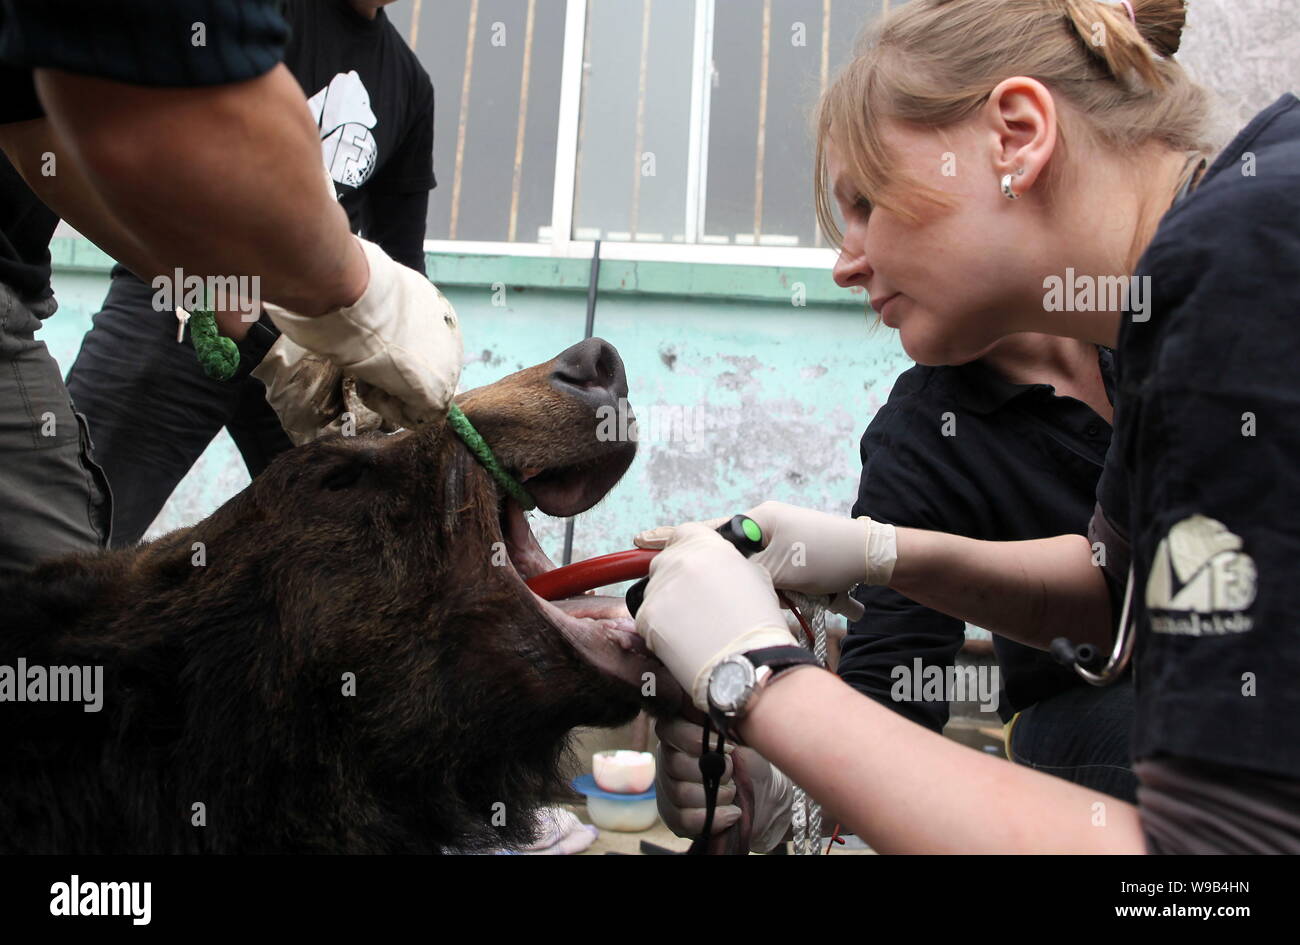 Staff from the Animals Asia Foundation examine a bear at a bear bile farm in Weihai city, east Chinas Shandong province, 19 April 2010.   Jill Robinso Stock Photo